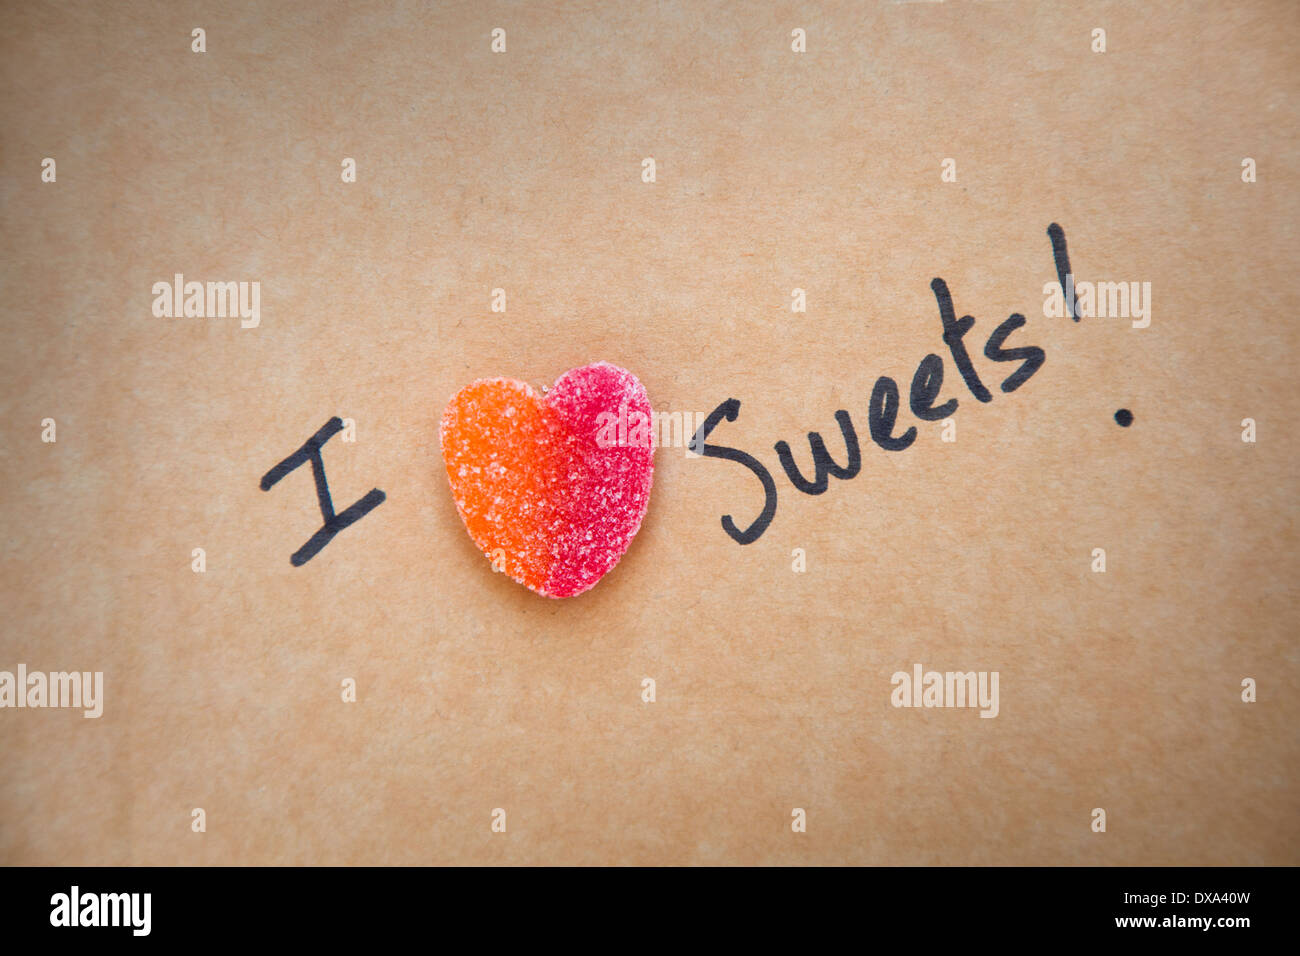 I love you message with a heart shape candy written on a cardboard. Stock Photo